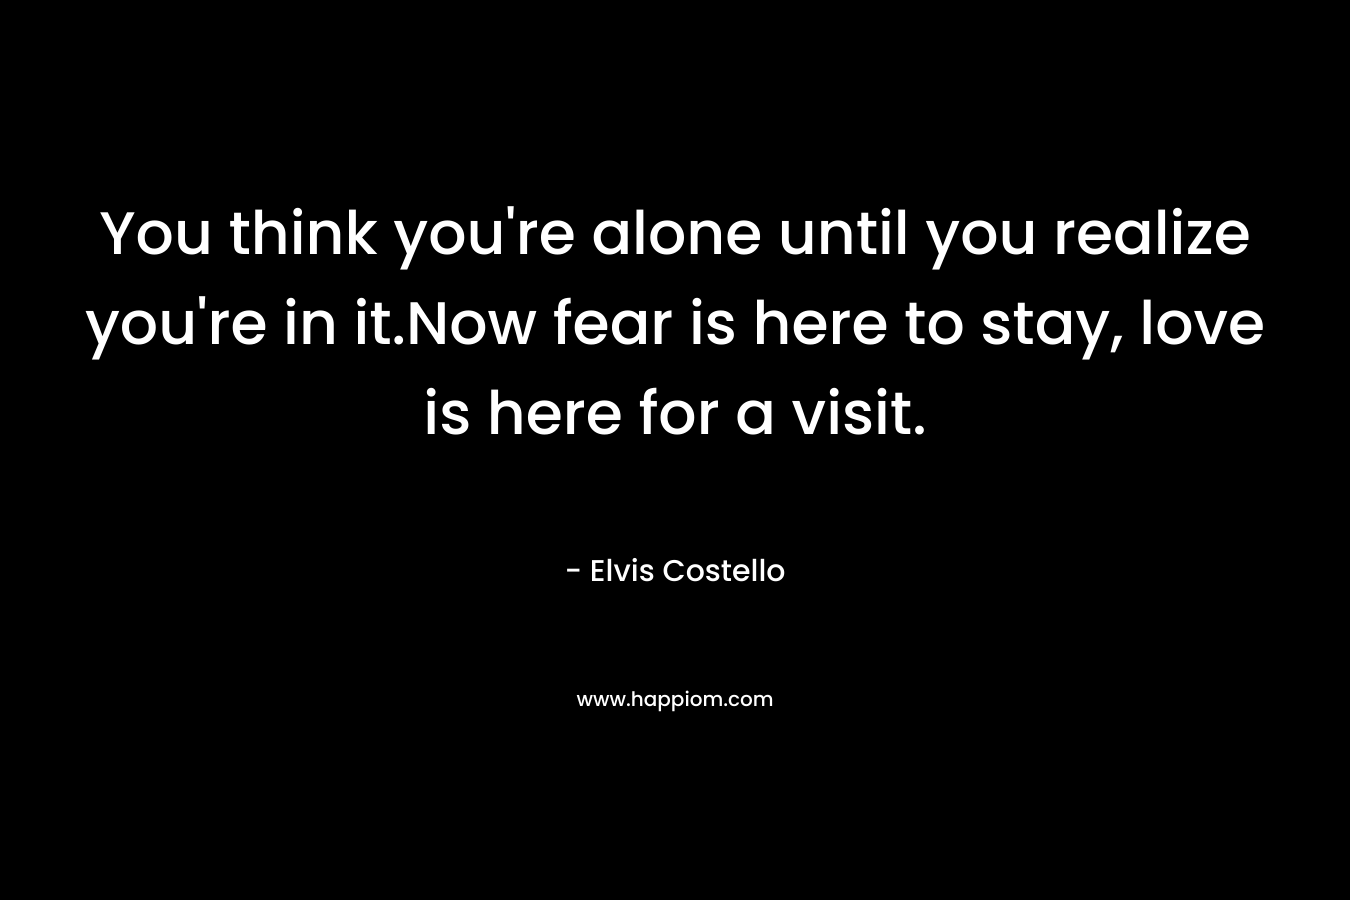 You think you're alone until you realize you're in it.Now fear is here to stay, love is here for a visit.